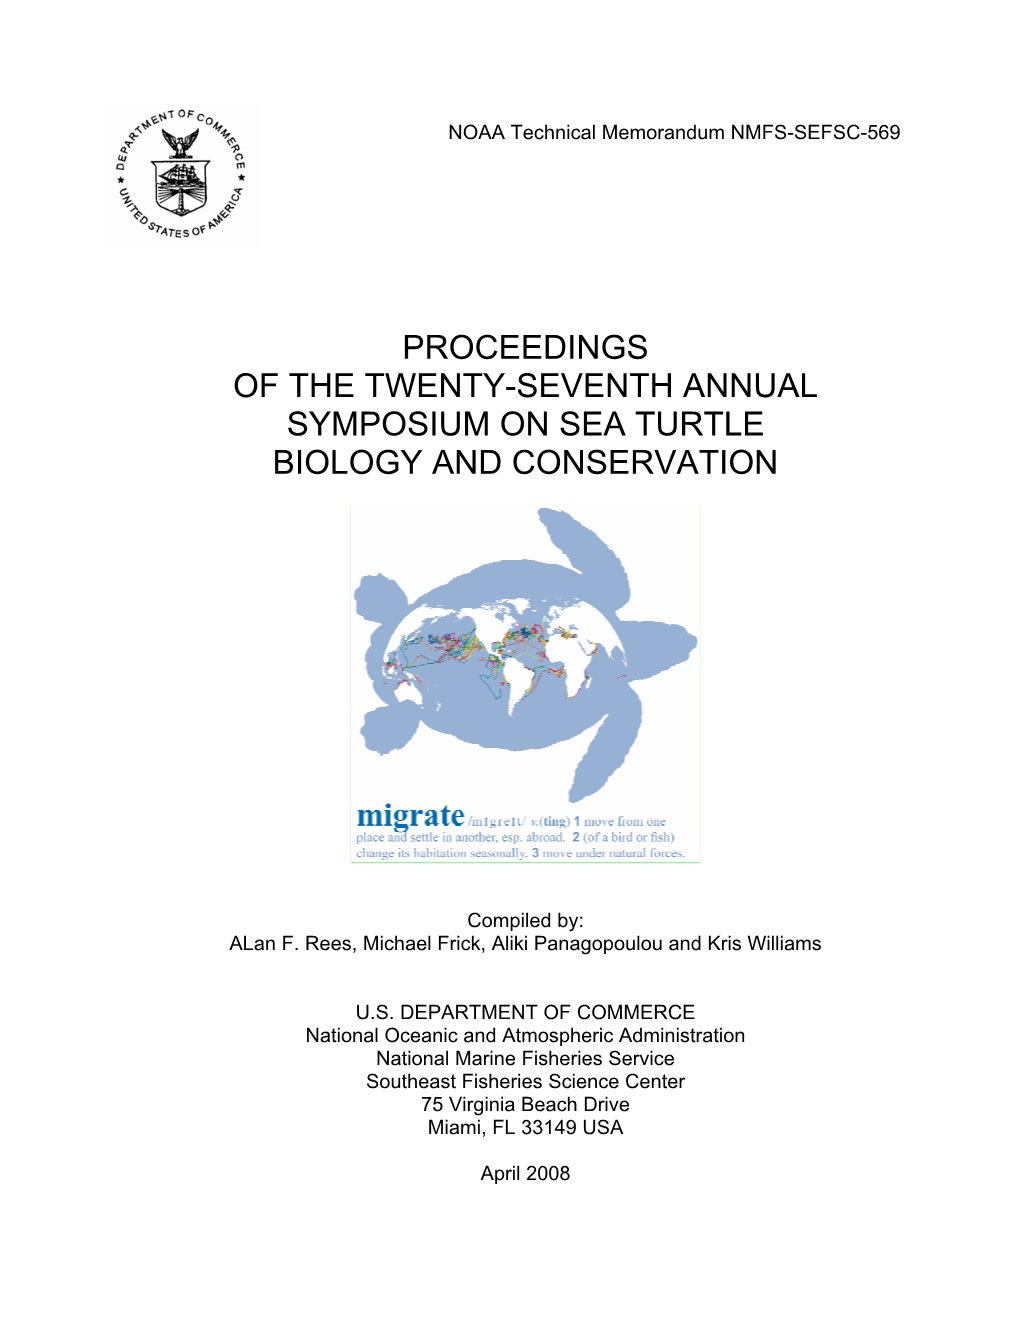 Proceedings of the Twenty-Seventh Annual Symposium on Sea Turtle Biology and Conservation